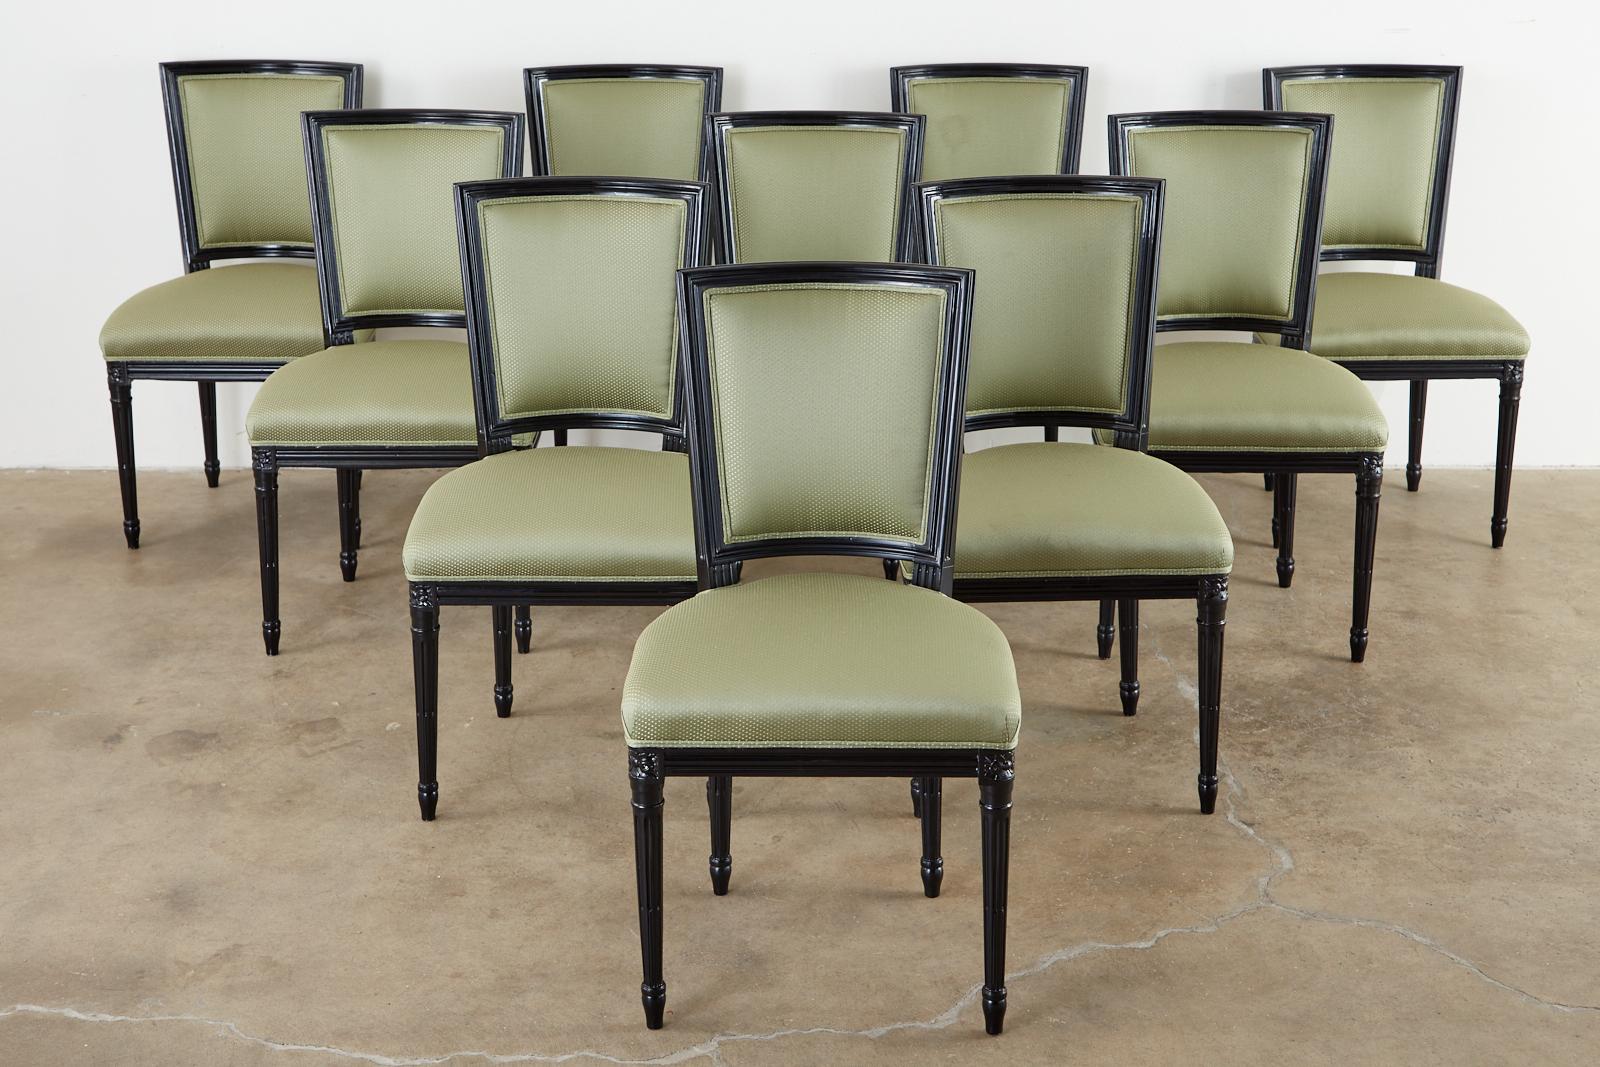 Dramatic set of ten black lacquered dining chairs made in the grand French Louis XVI taste. Attributed to Maison Jansen from the estate of Roger Prigent Malmaison, New York. Upholstered with a pistachio green fabric having gilt specks. The frames